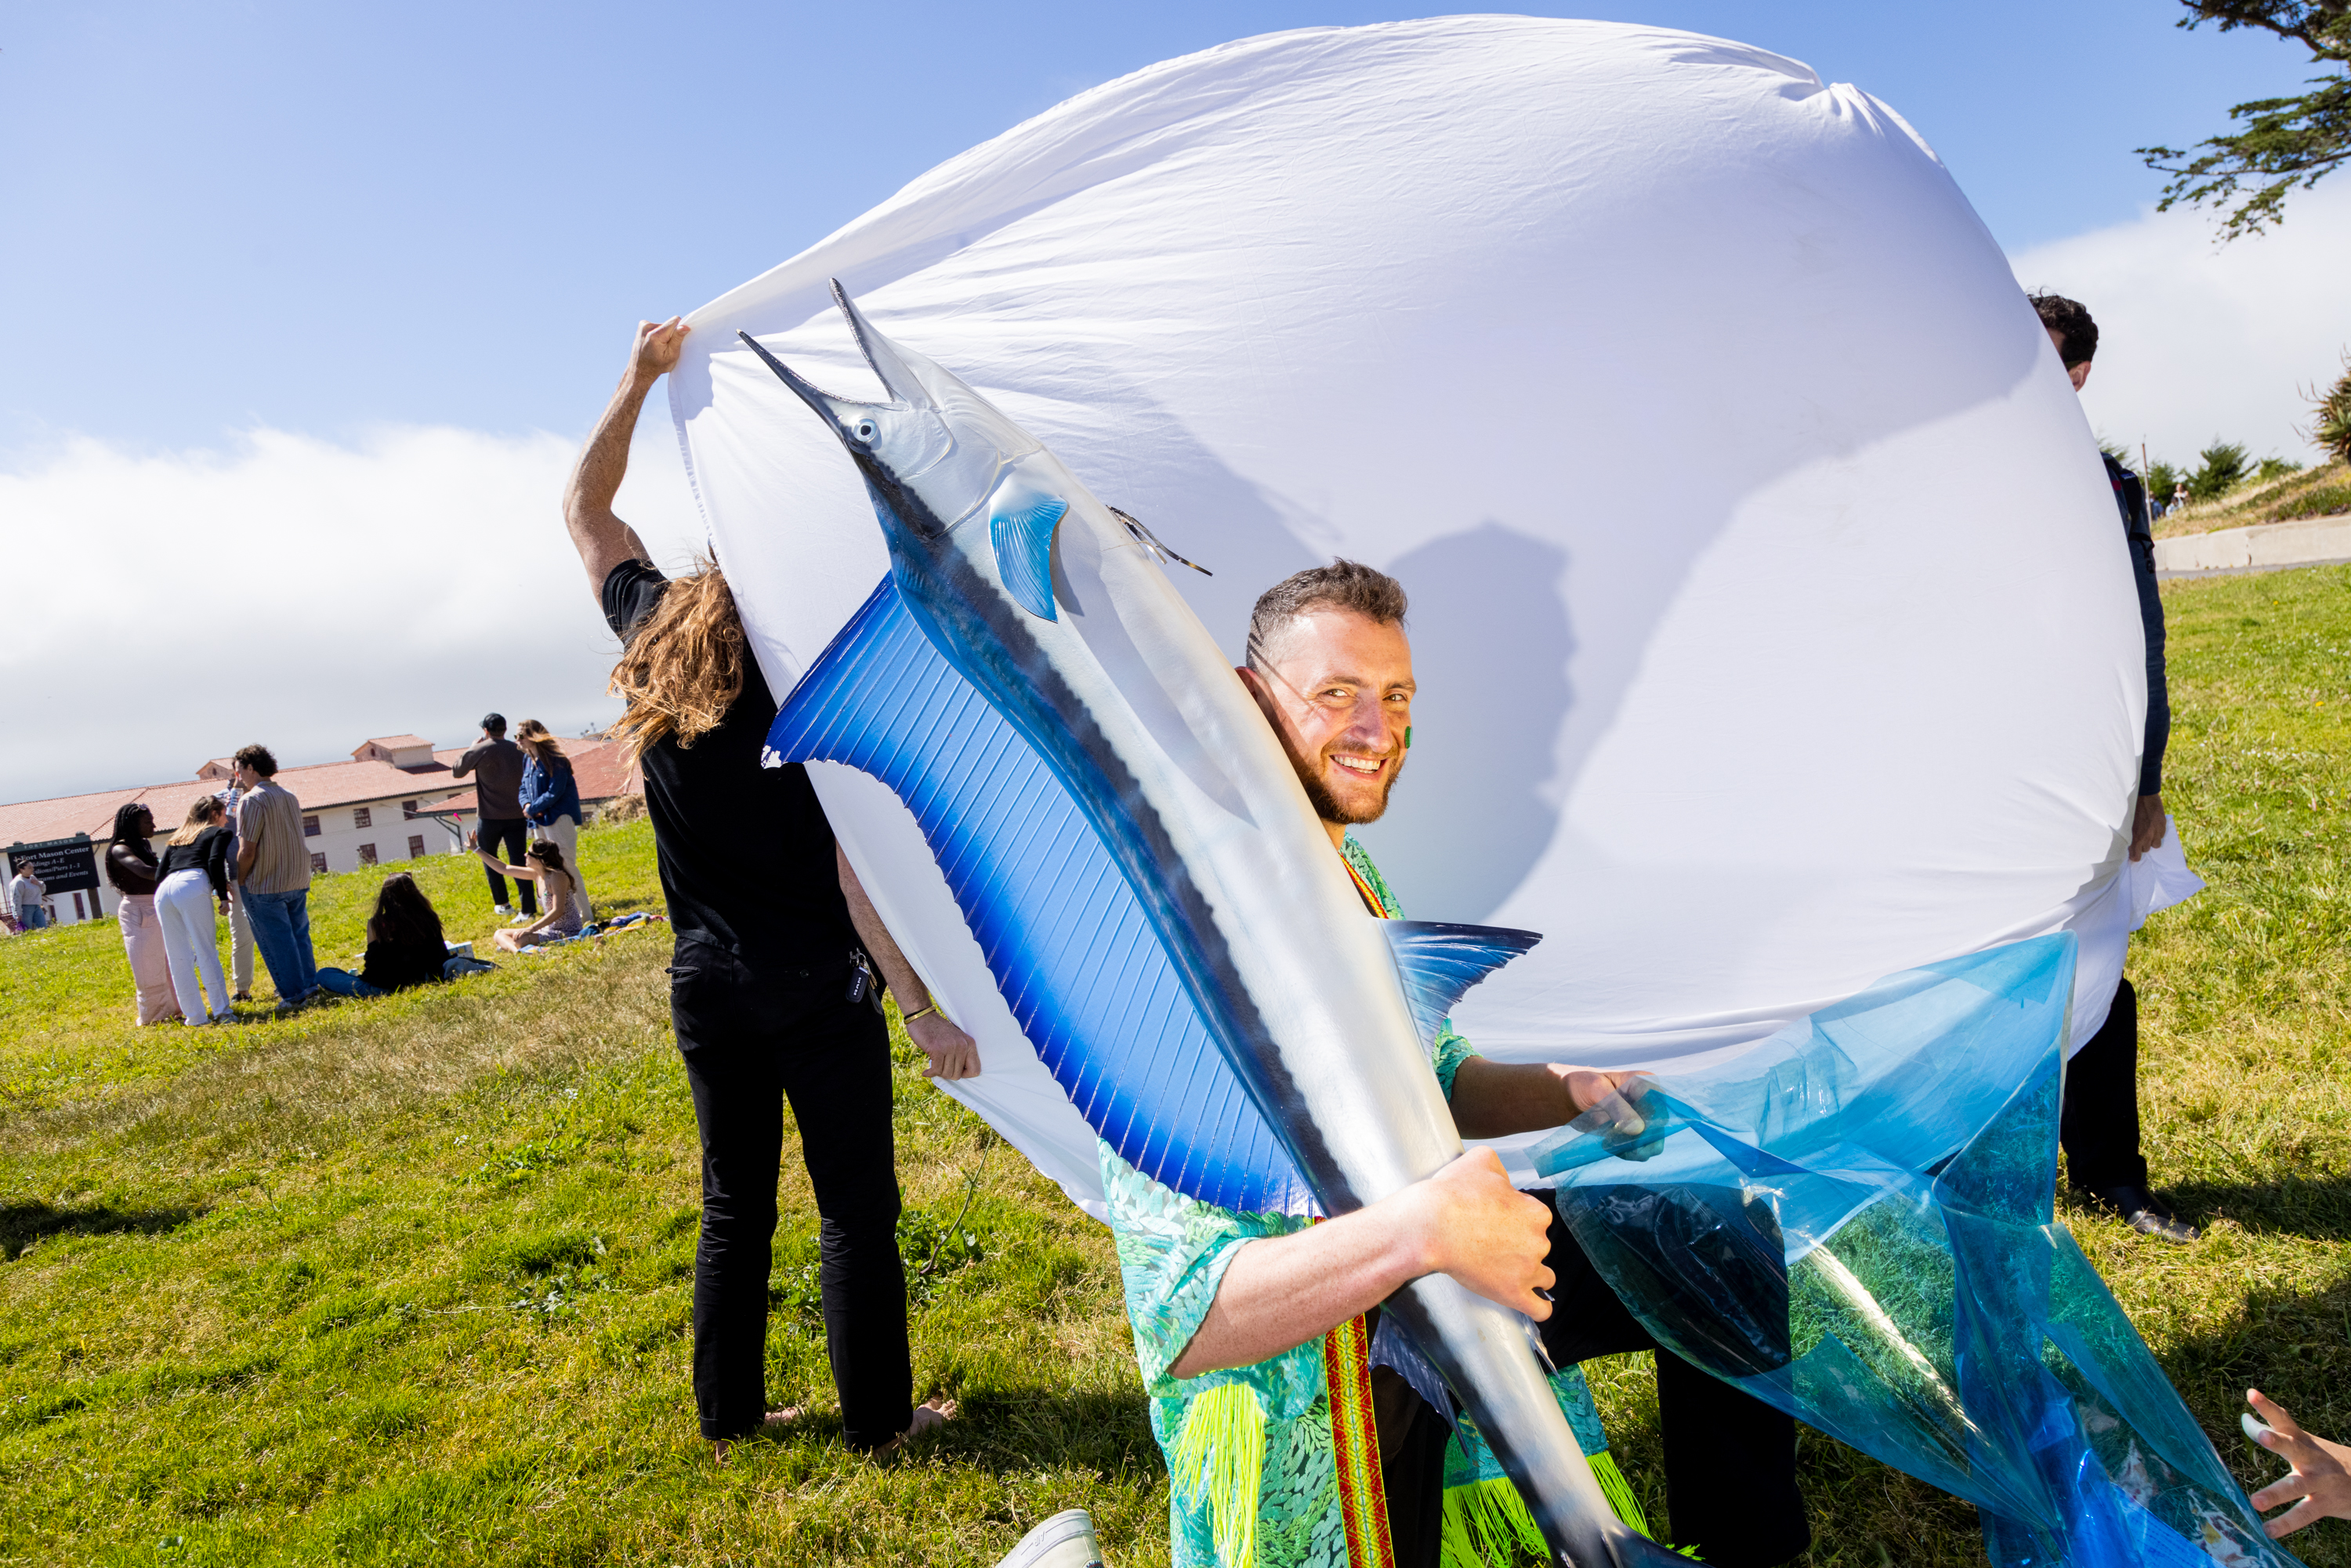 A man smiles while holding a large, sailfish mount at an outdoor event with people and a giant white sheet in the background.